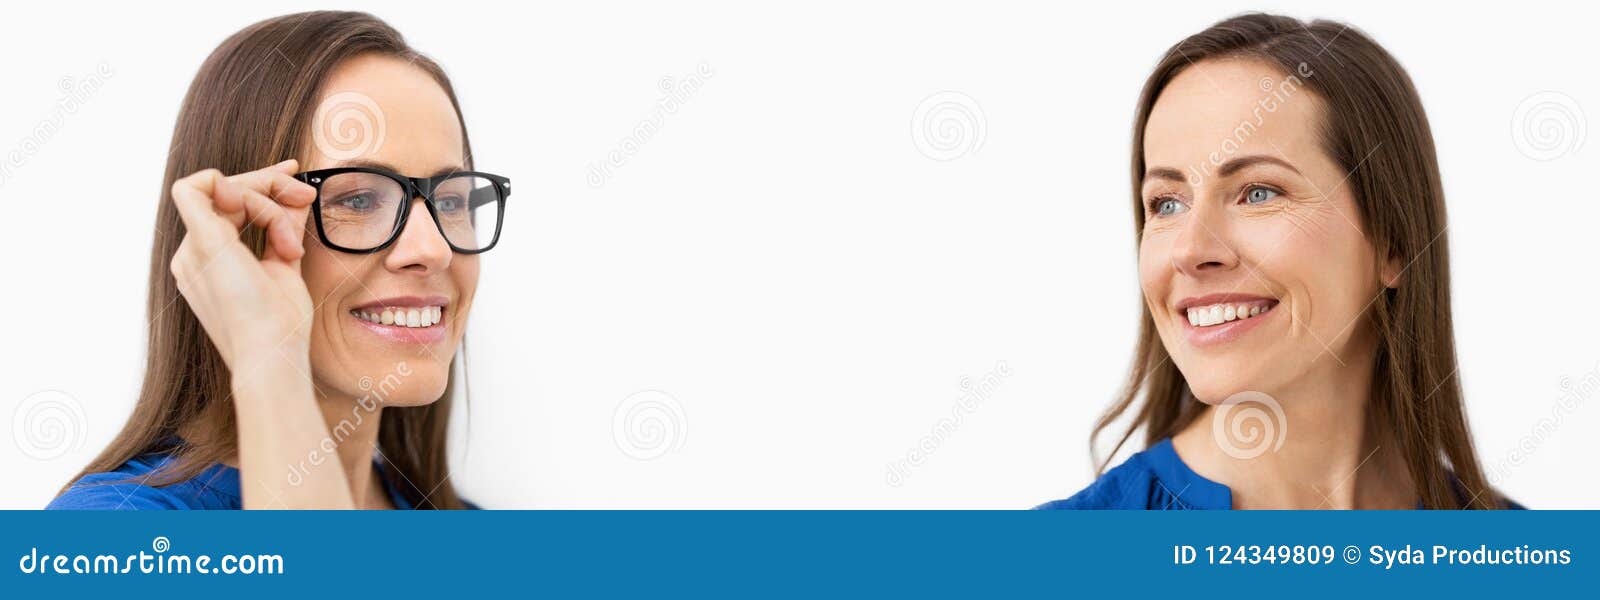 Same Woman With And Without Glasses Stock Image Image Of Happy Eyeglasses 124349809